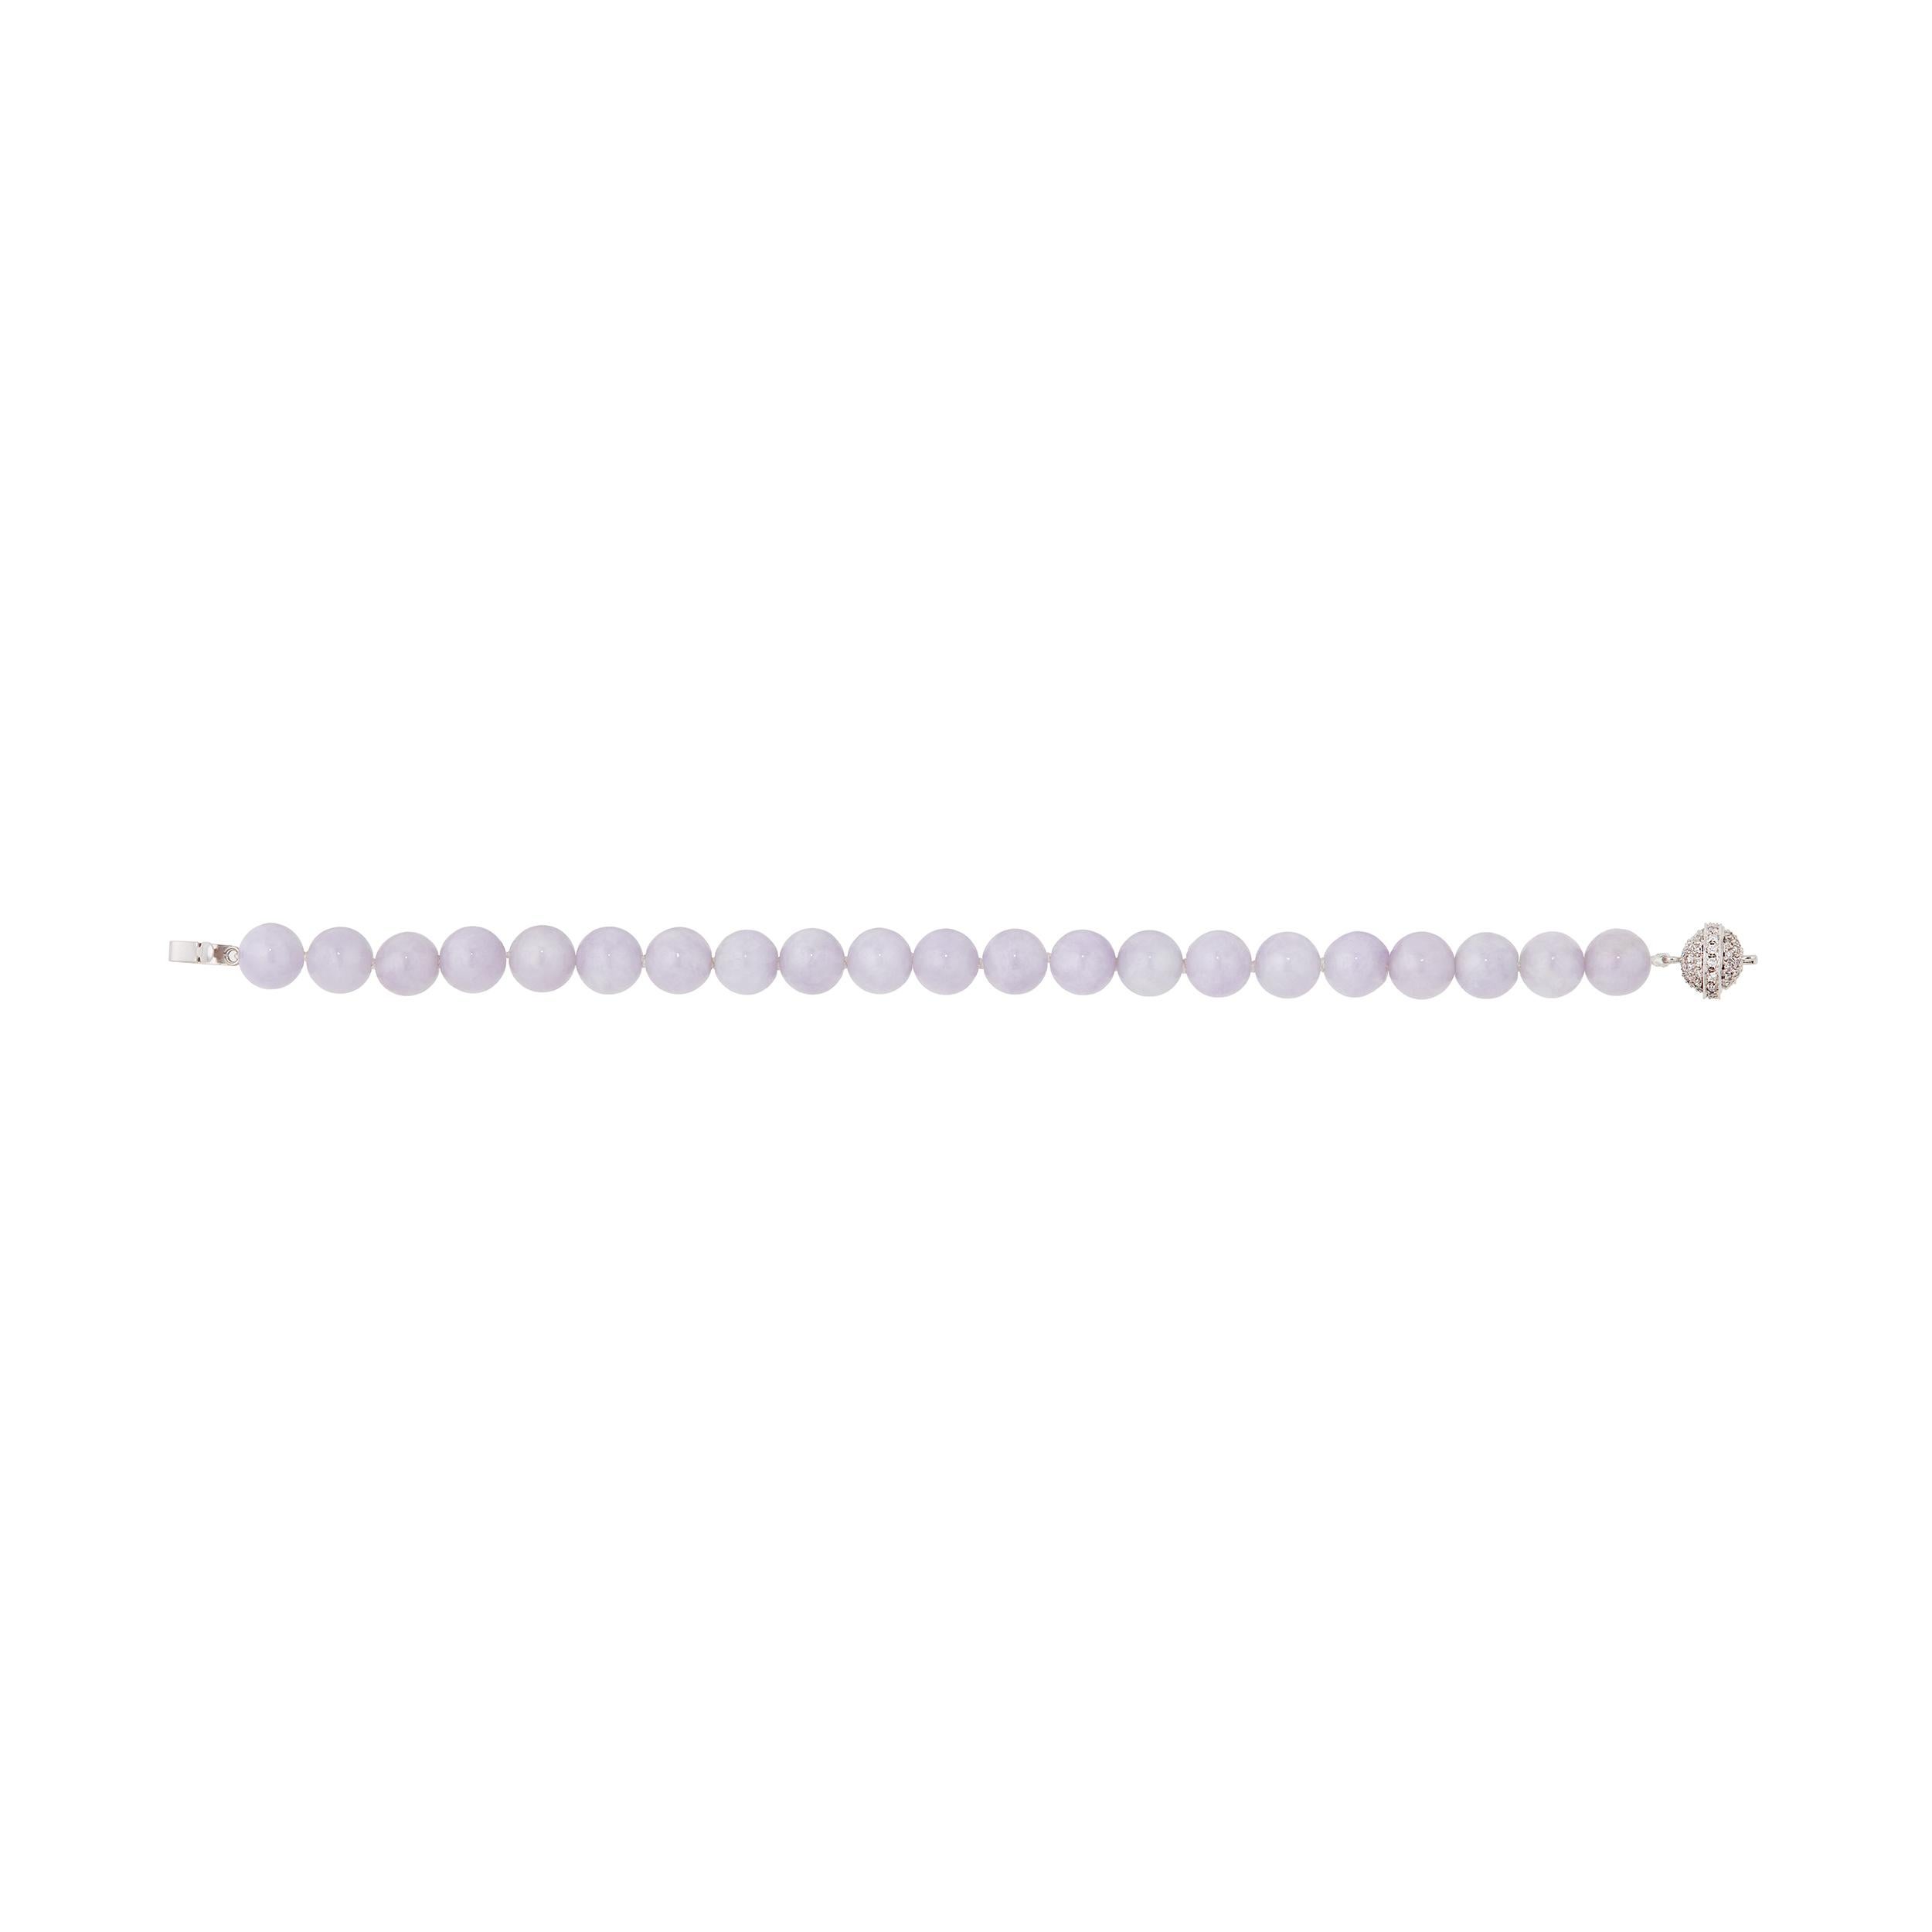 Overall Description:

Certified Lavender Natural A Jade Jadeite Round Beads

18 Karat White Gold Pearl Clasp
     •11.5 mm diameter
     •0.56 Carat Diamonds 

Overall Length: 7 inches
Bead Measurement: 8 mm 
Weight: 19 grams 